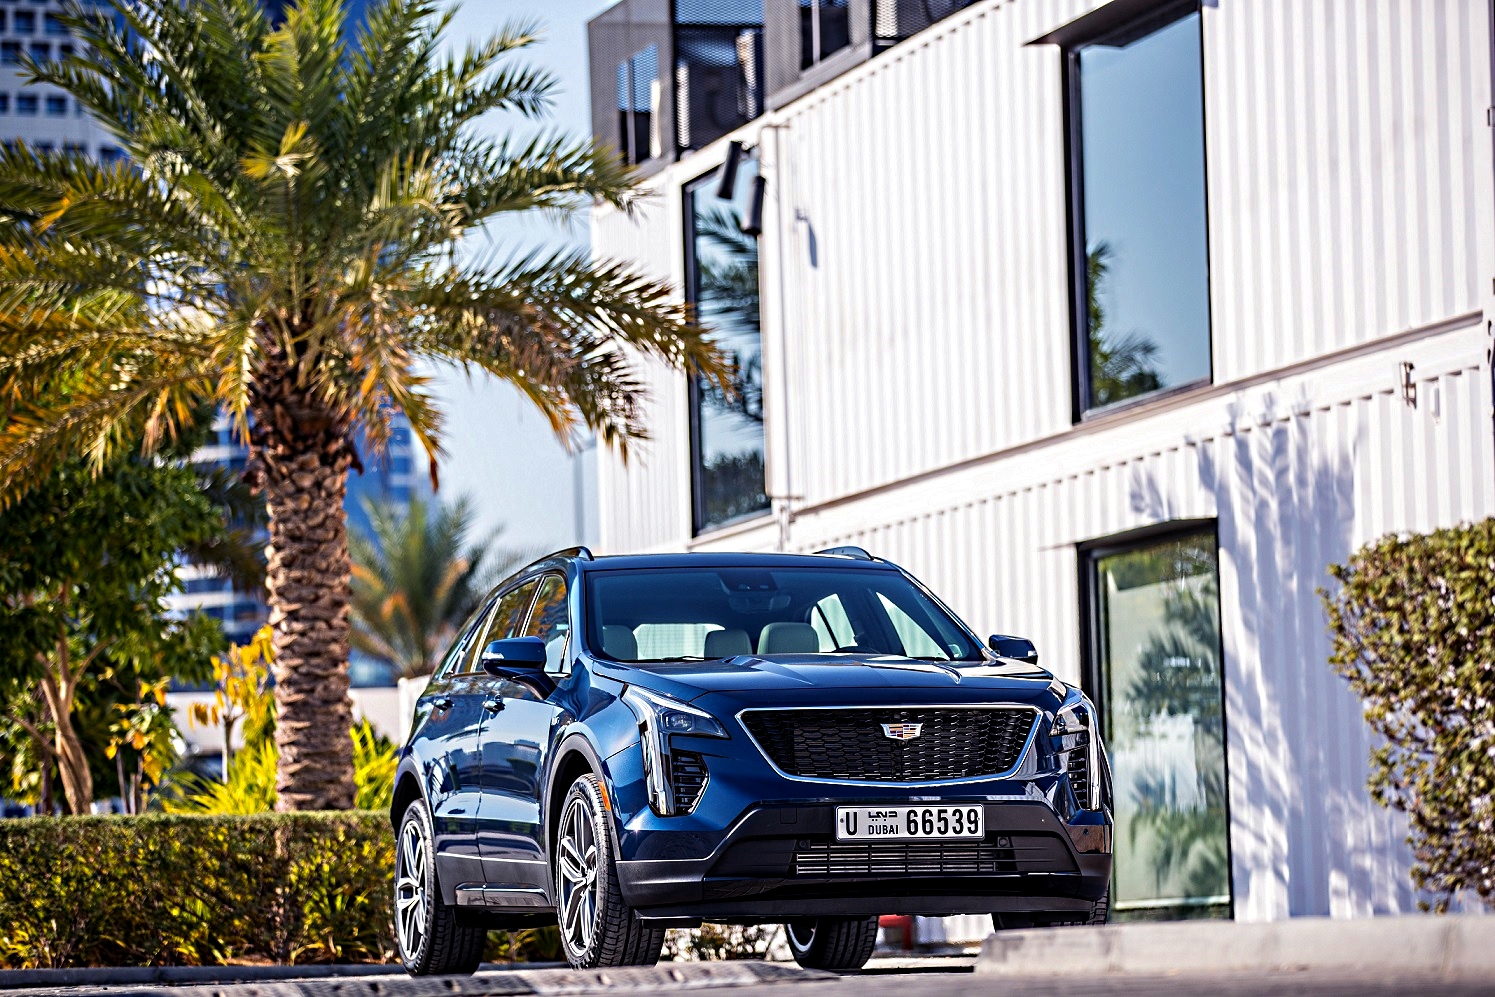 The All-New Cadillac XT4 Made Its UAE Debut at the Region’s Largest Street-Culture Festival, Sole Dxb